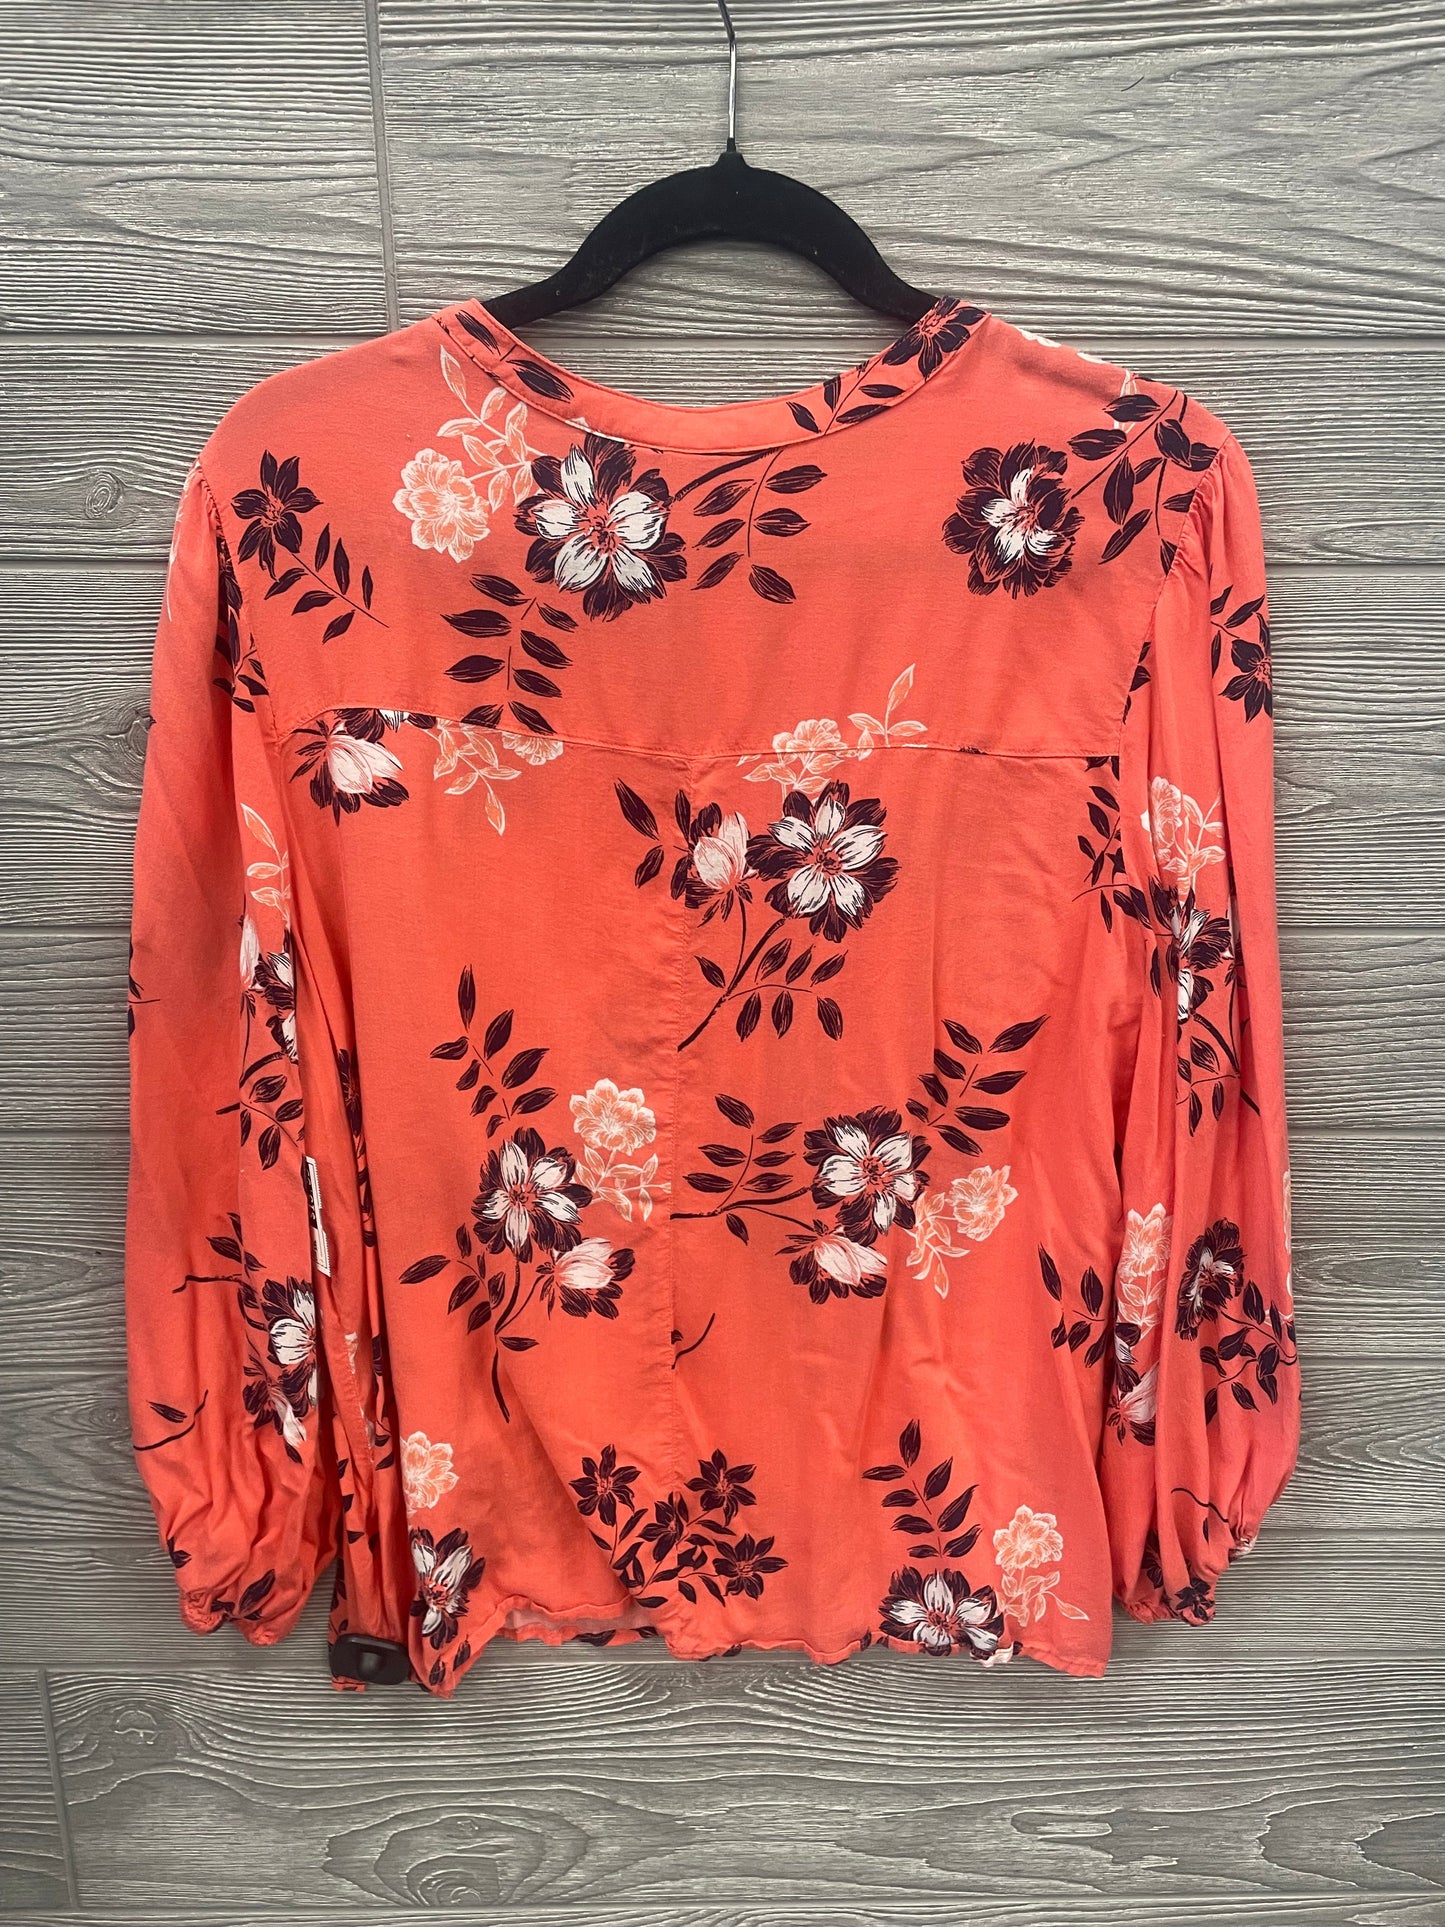 Coral Top Long Sleeve Gap, Size Xxl